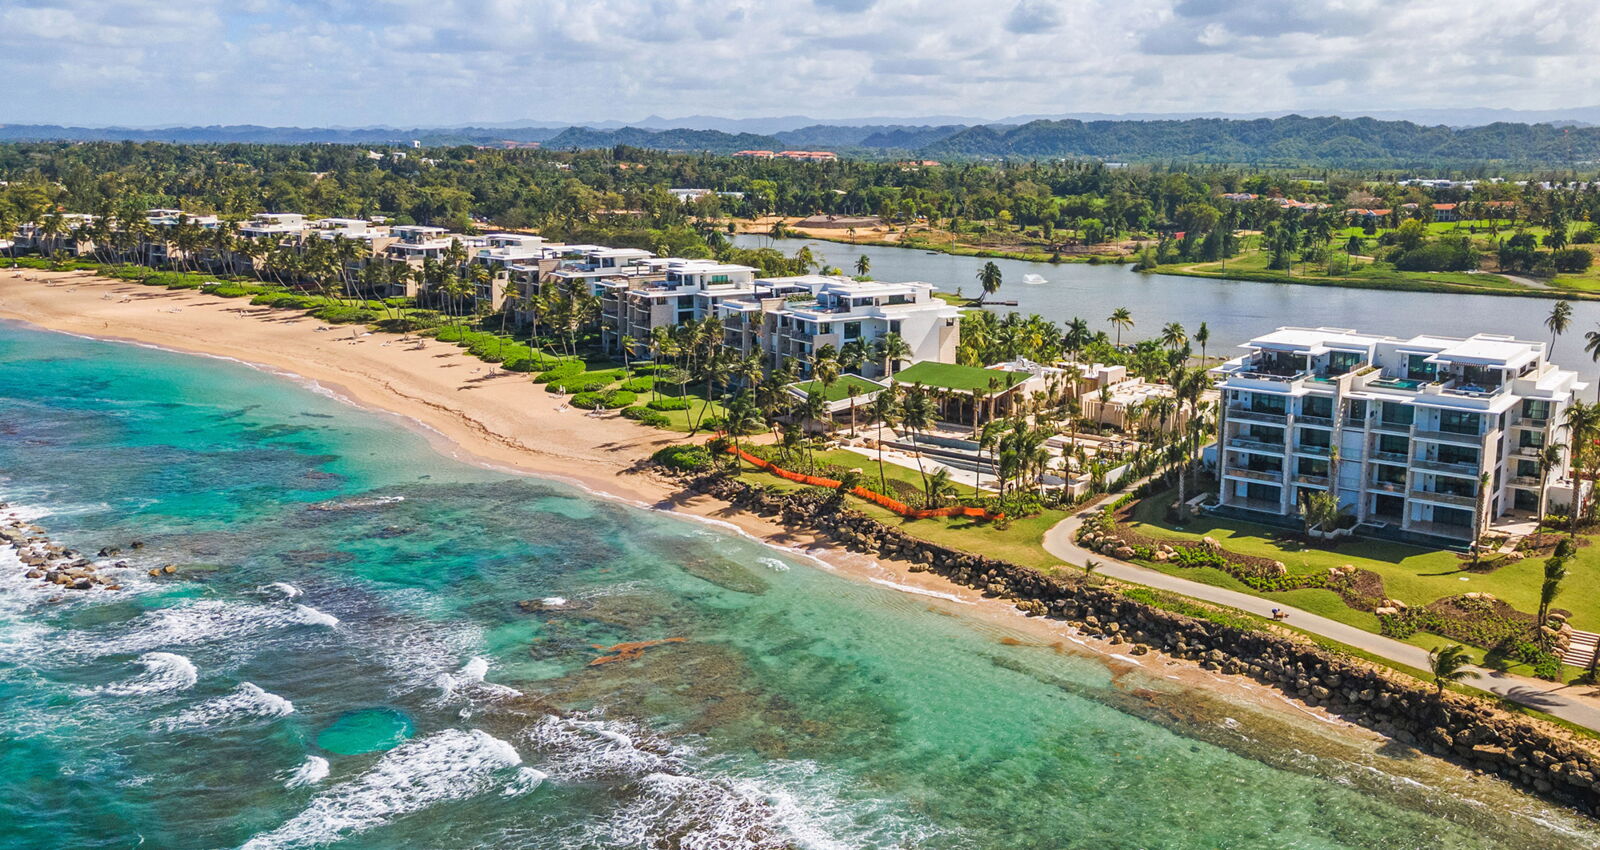 west point ritz-carlton reserve residence aerial view showcasing the ocean and waterfront views